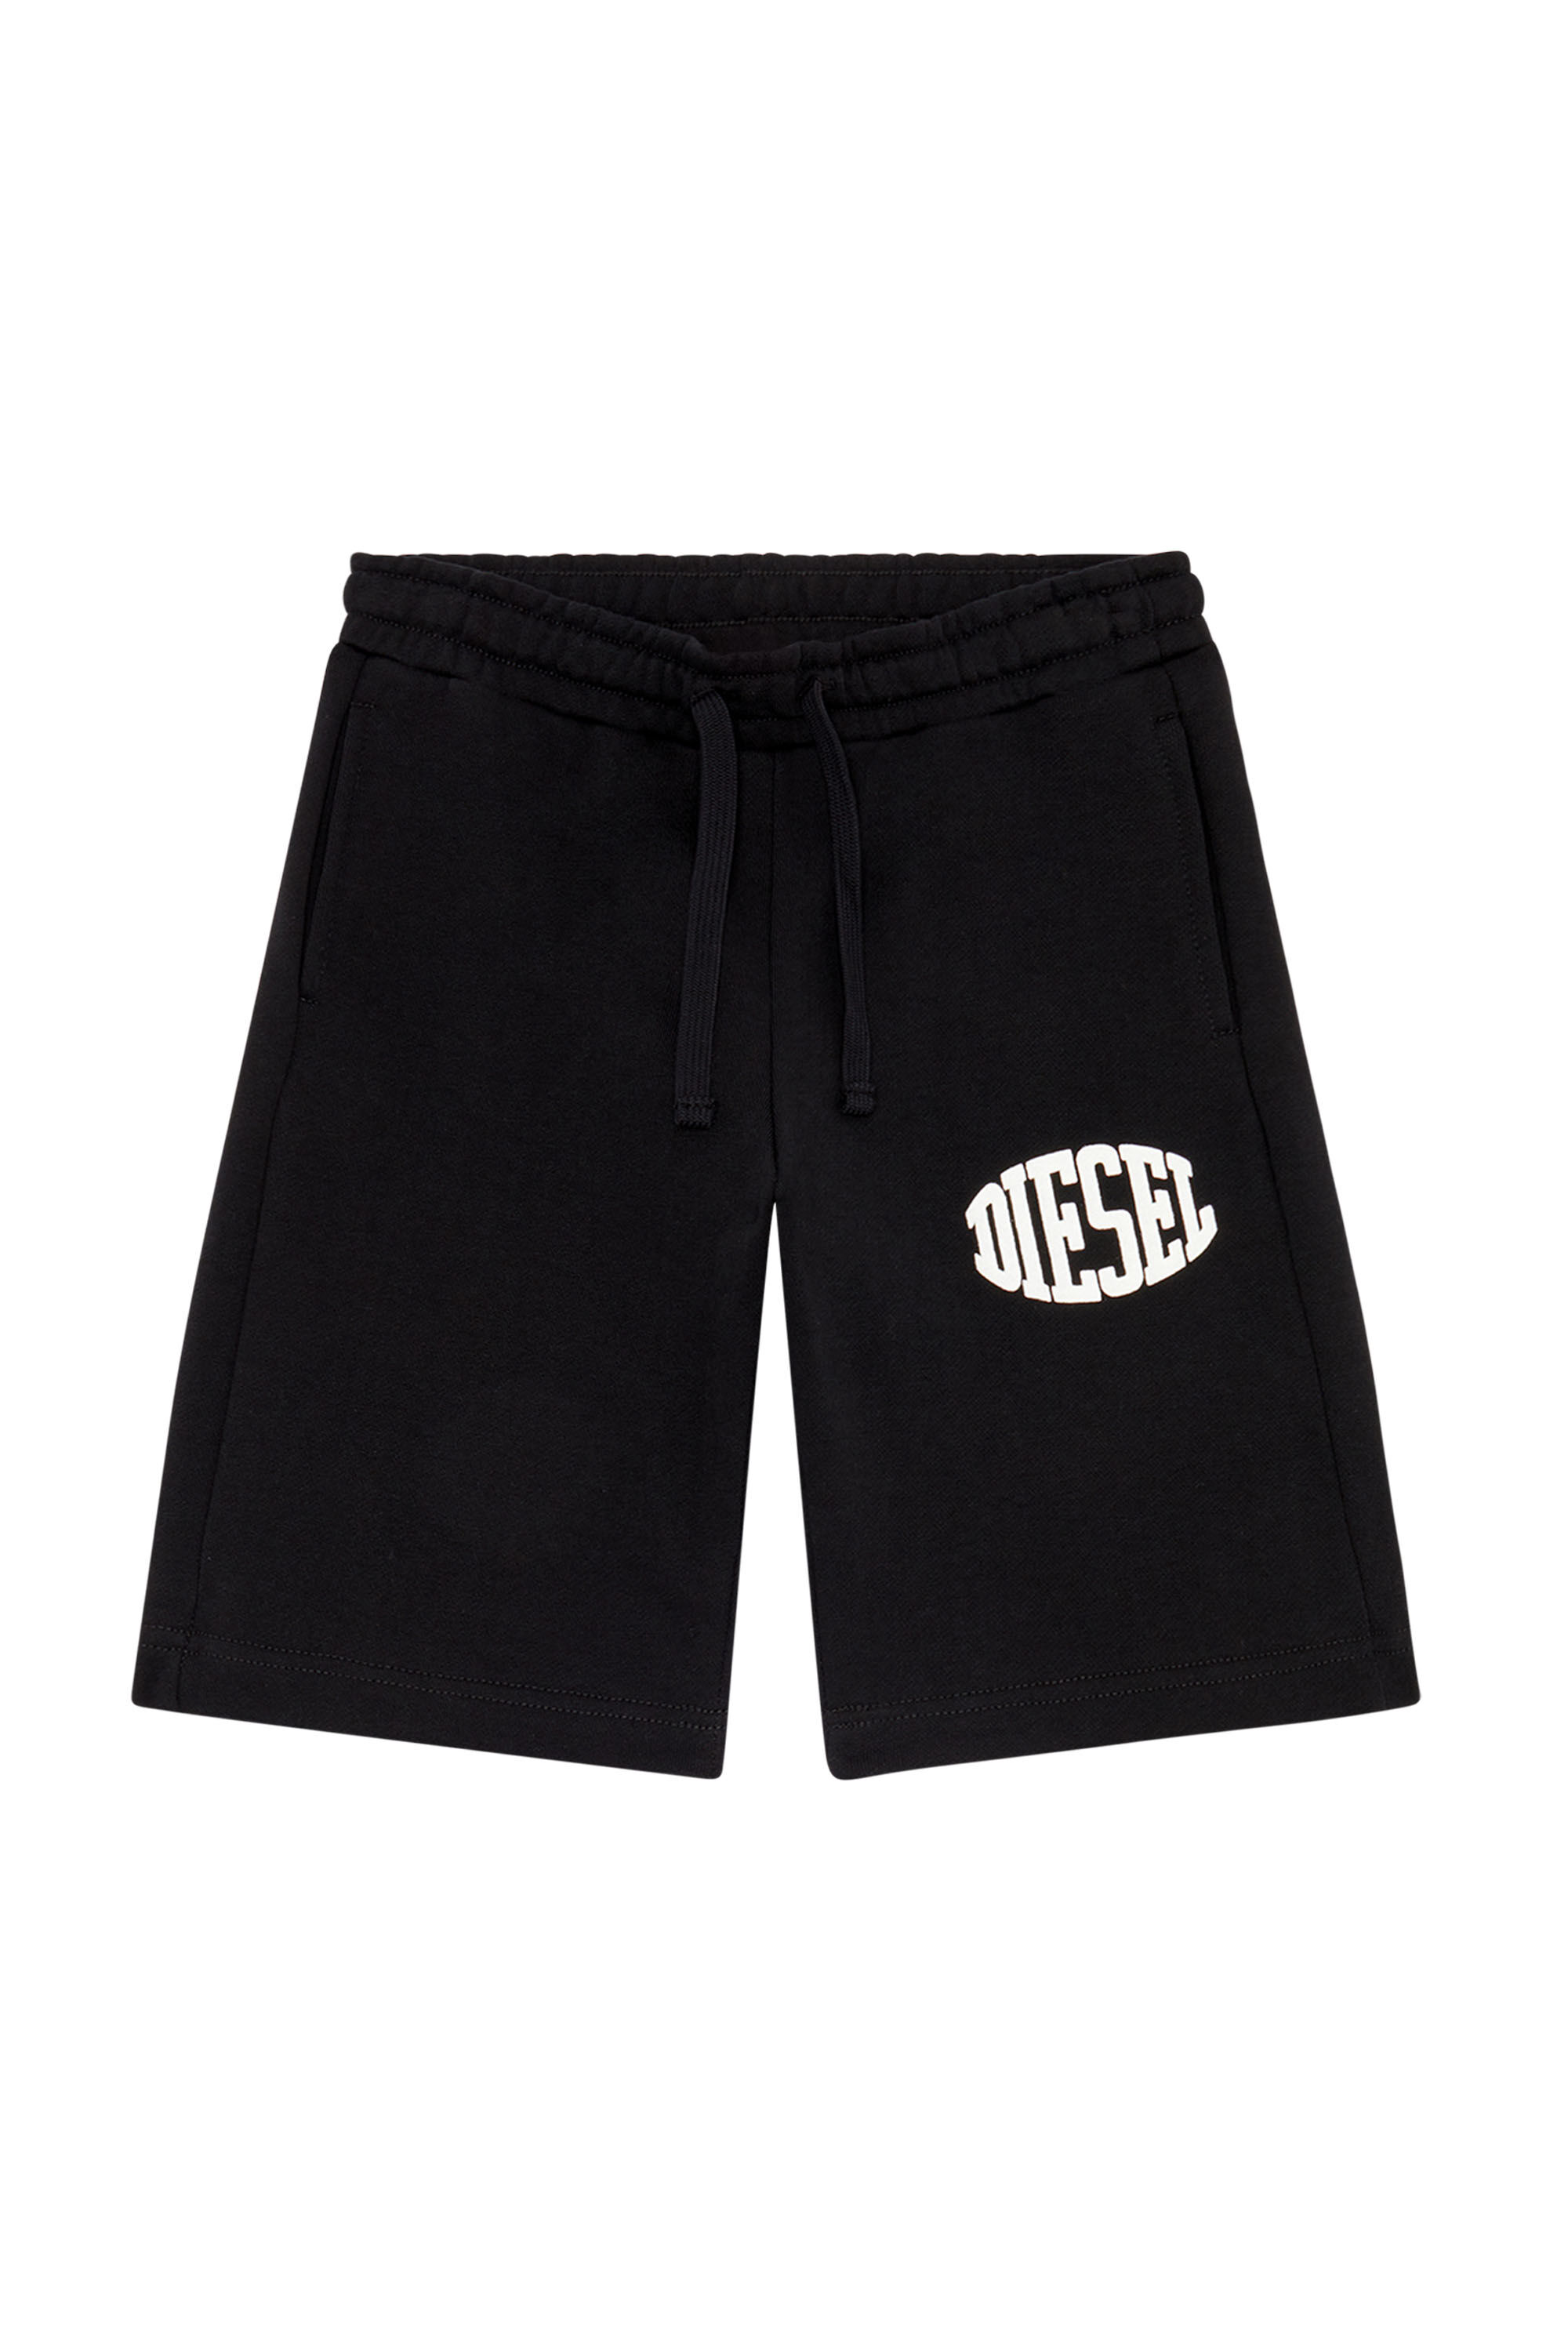 PBOL Sweat shorts with Diesel lettering｜ブラック｜ボーイズ｜DIESEL